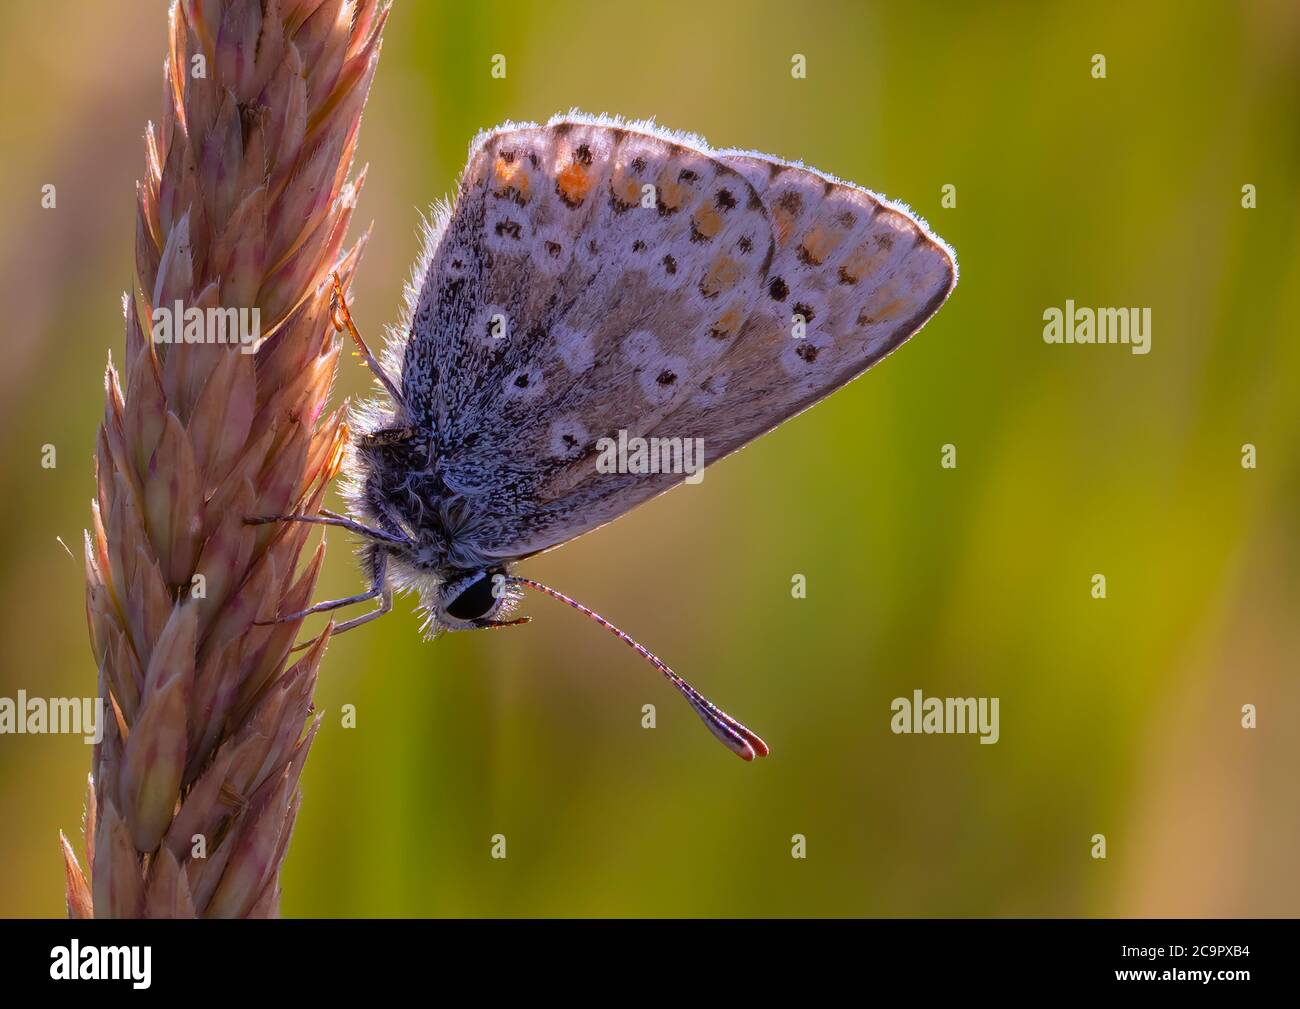 A beautiful Brown Argus butterfly resting o a head of grass seeds. Stock Photo